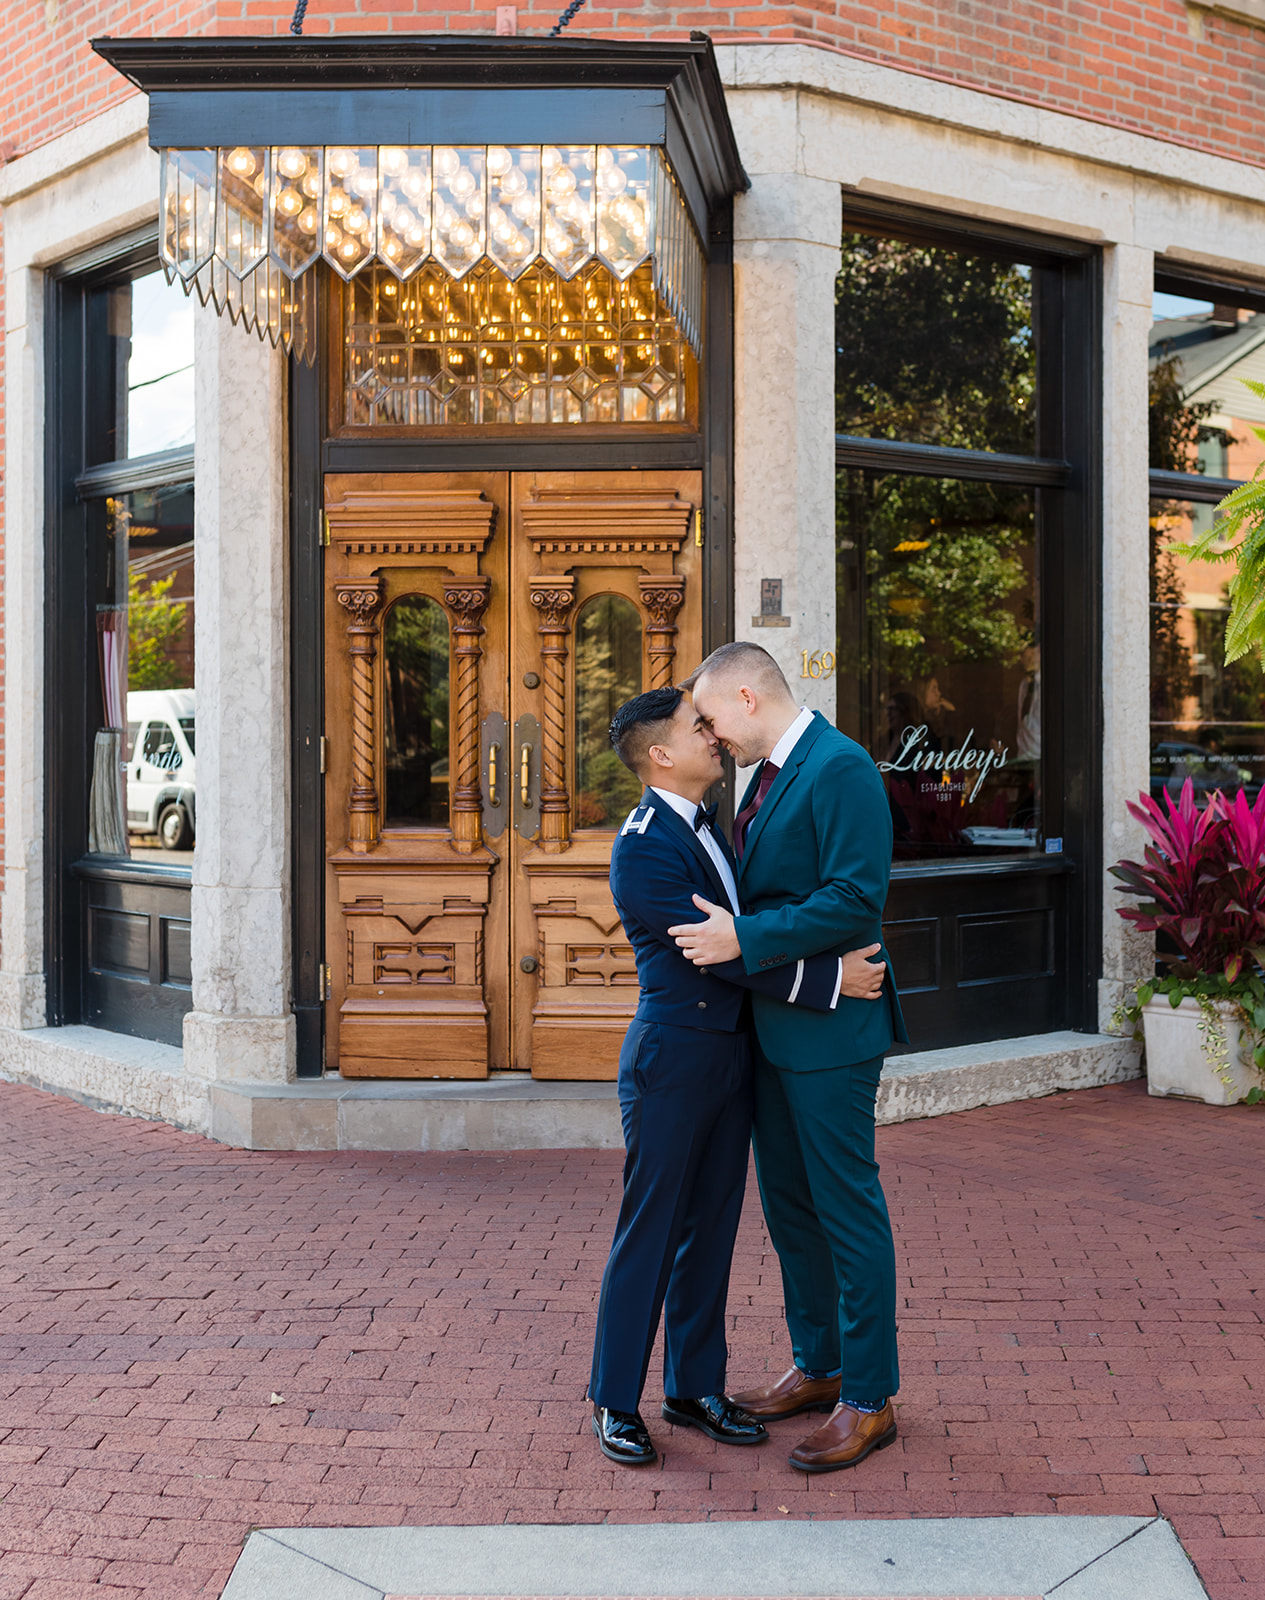 The glittery front door of Lindeys in German Village serves as a classy backdrop as these two grooms embrace 